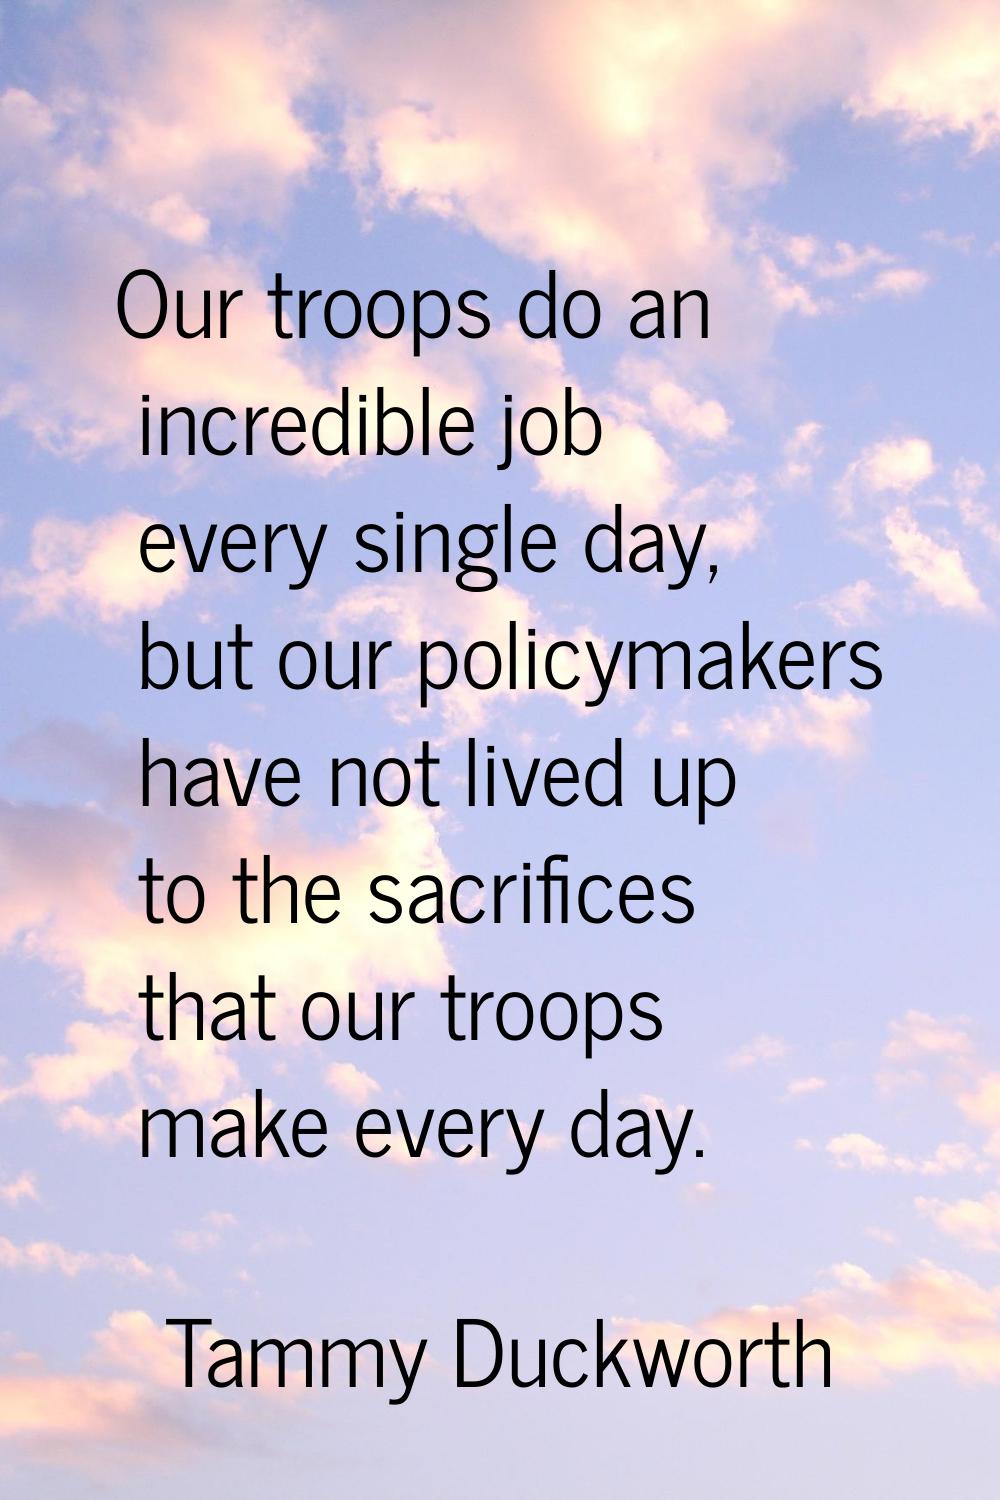 Our troops do an incredible job every single day, but our policymakers have not lived up to the sac